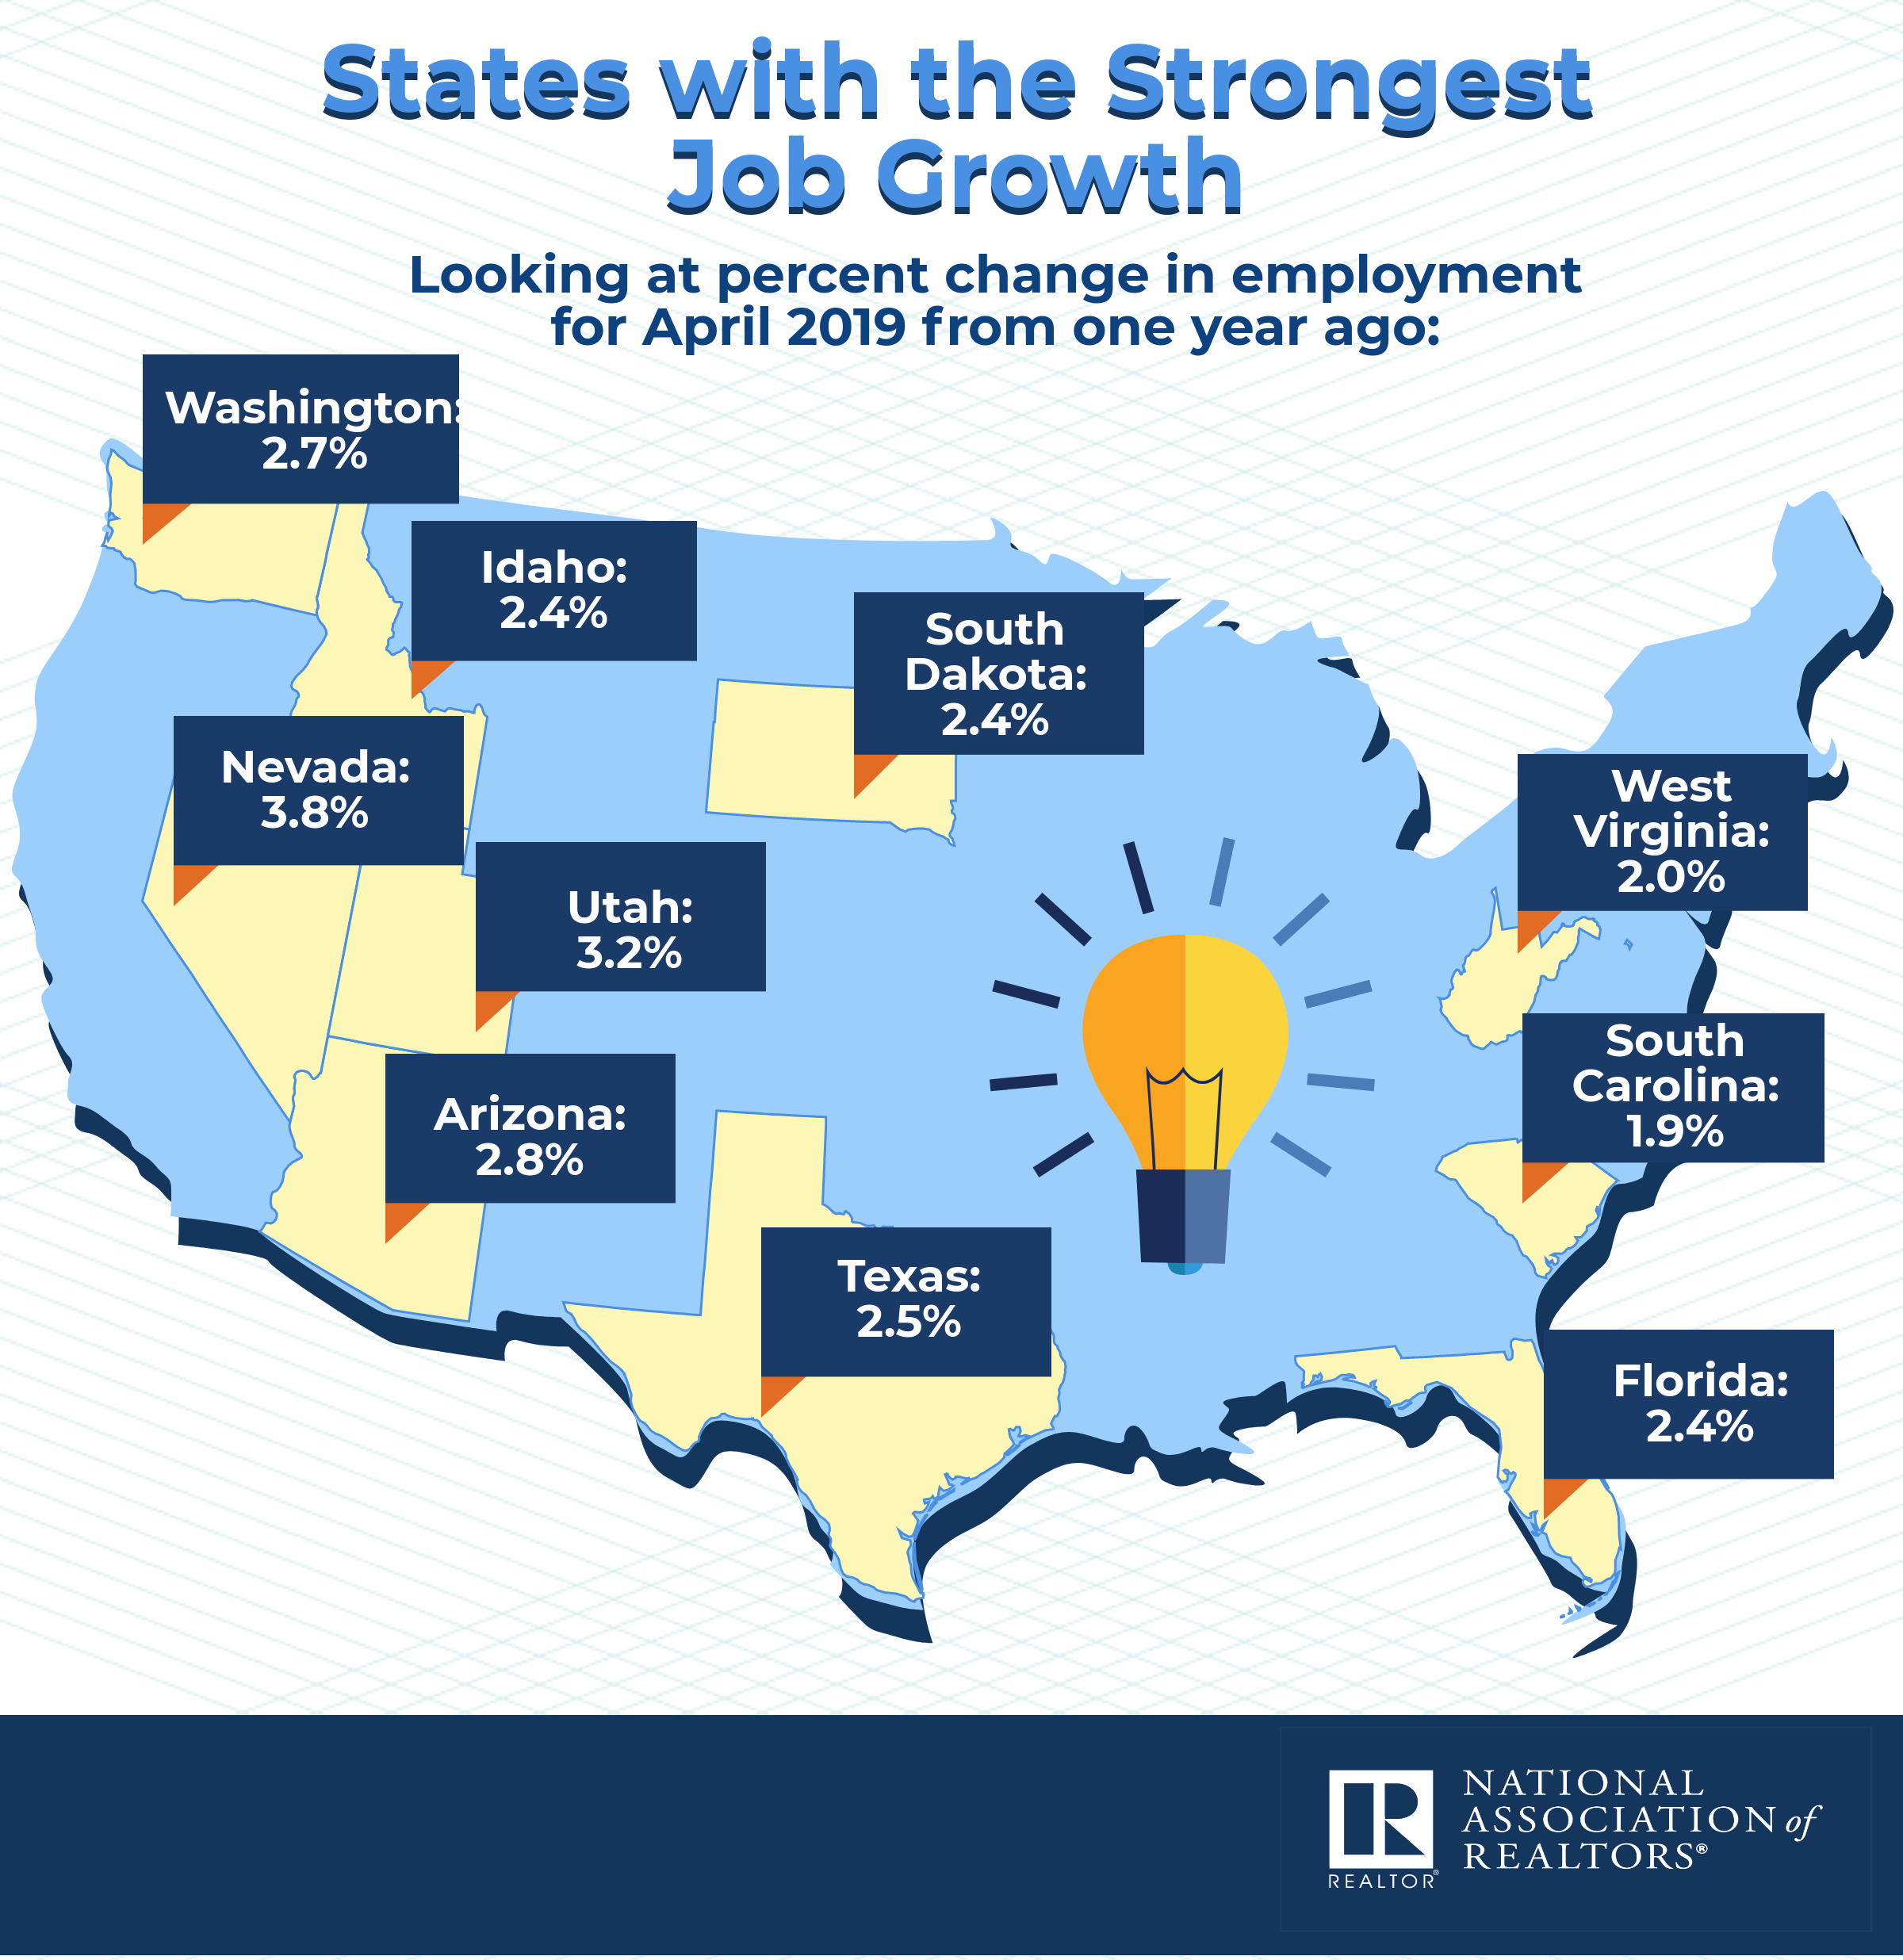 States with the strongest job growth 2019